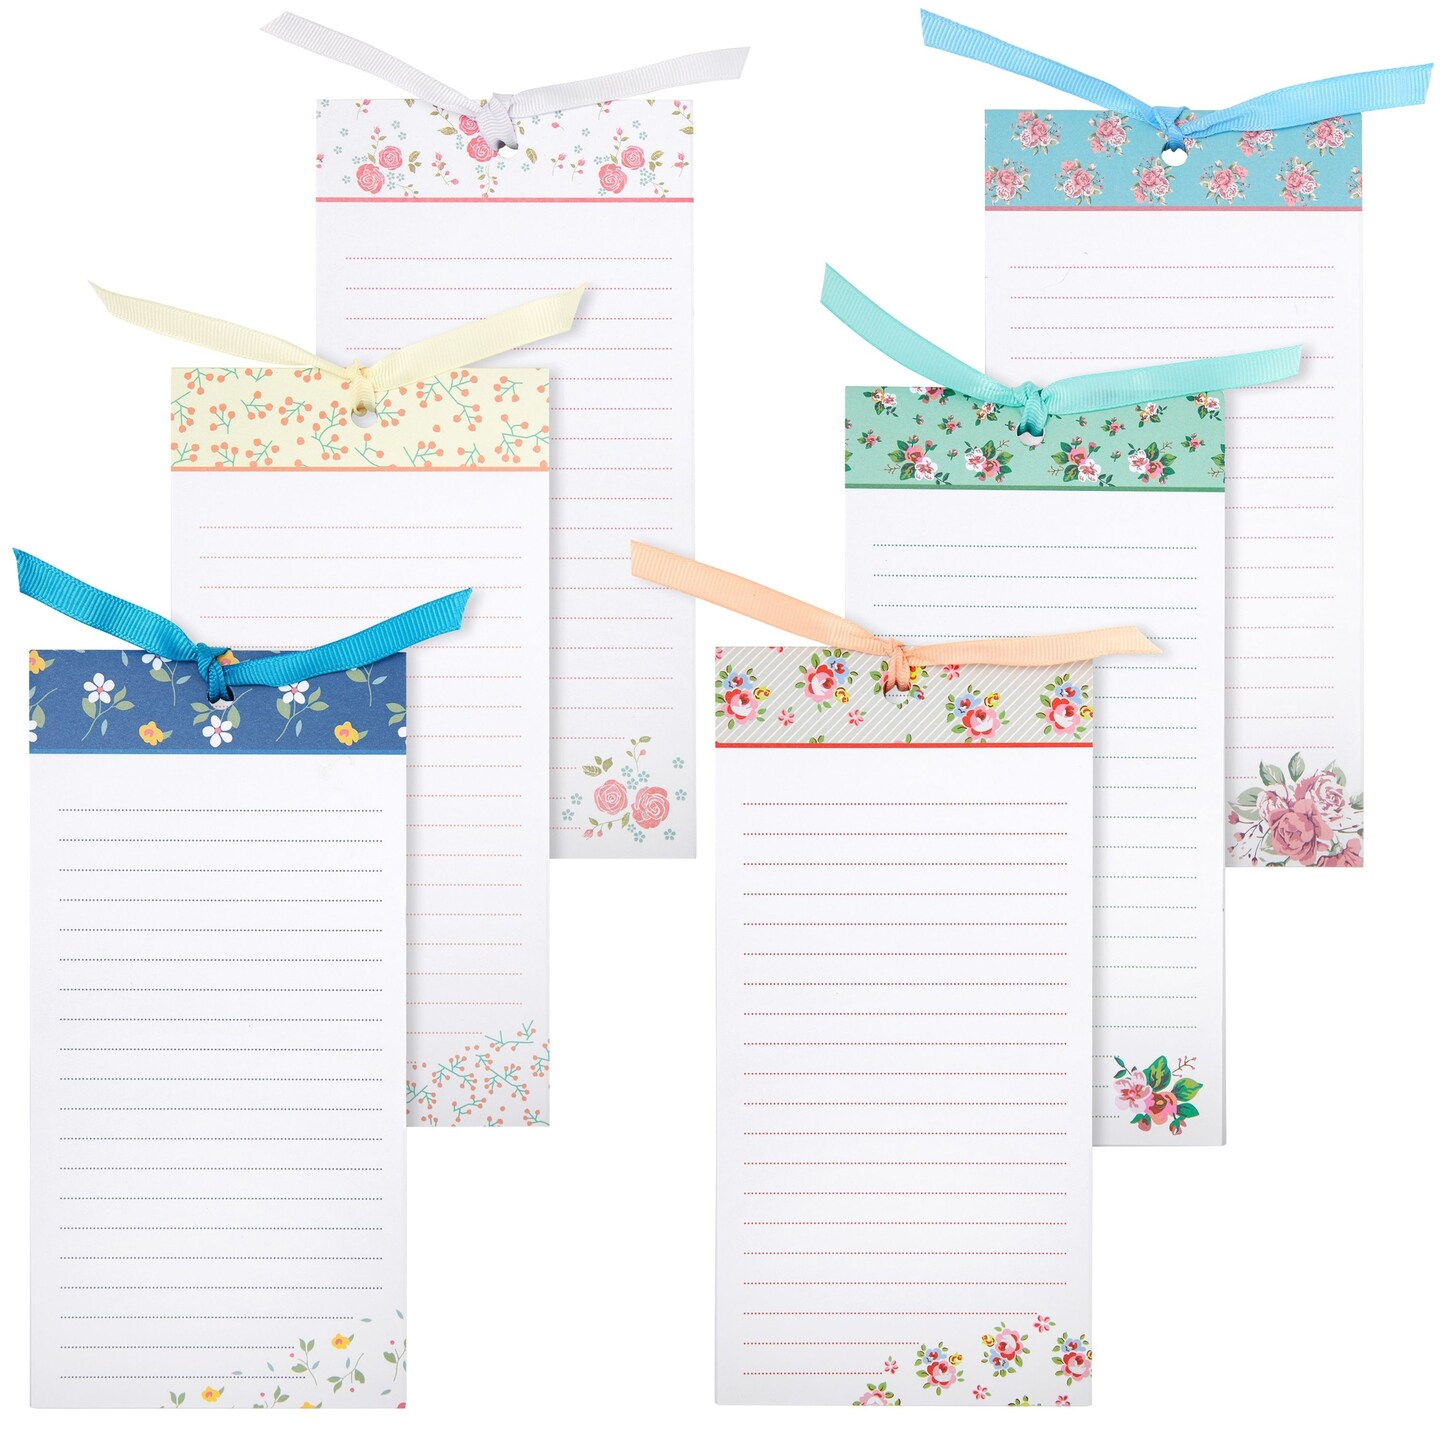 Papercrafting Stationery & Notepads